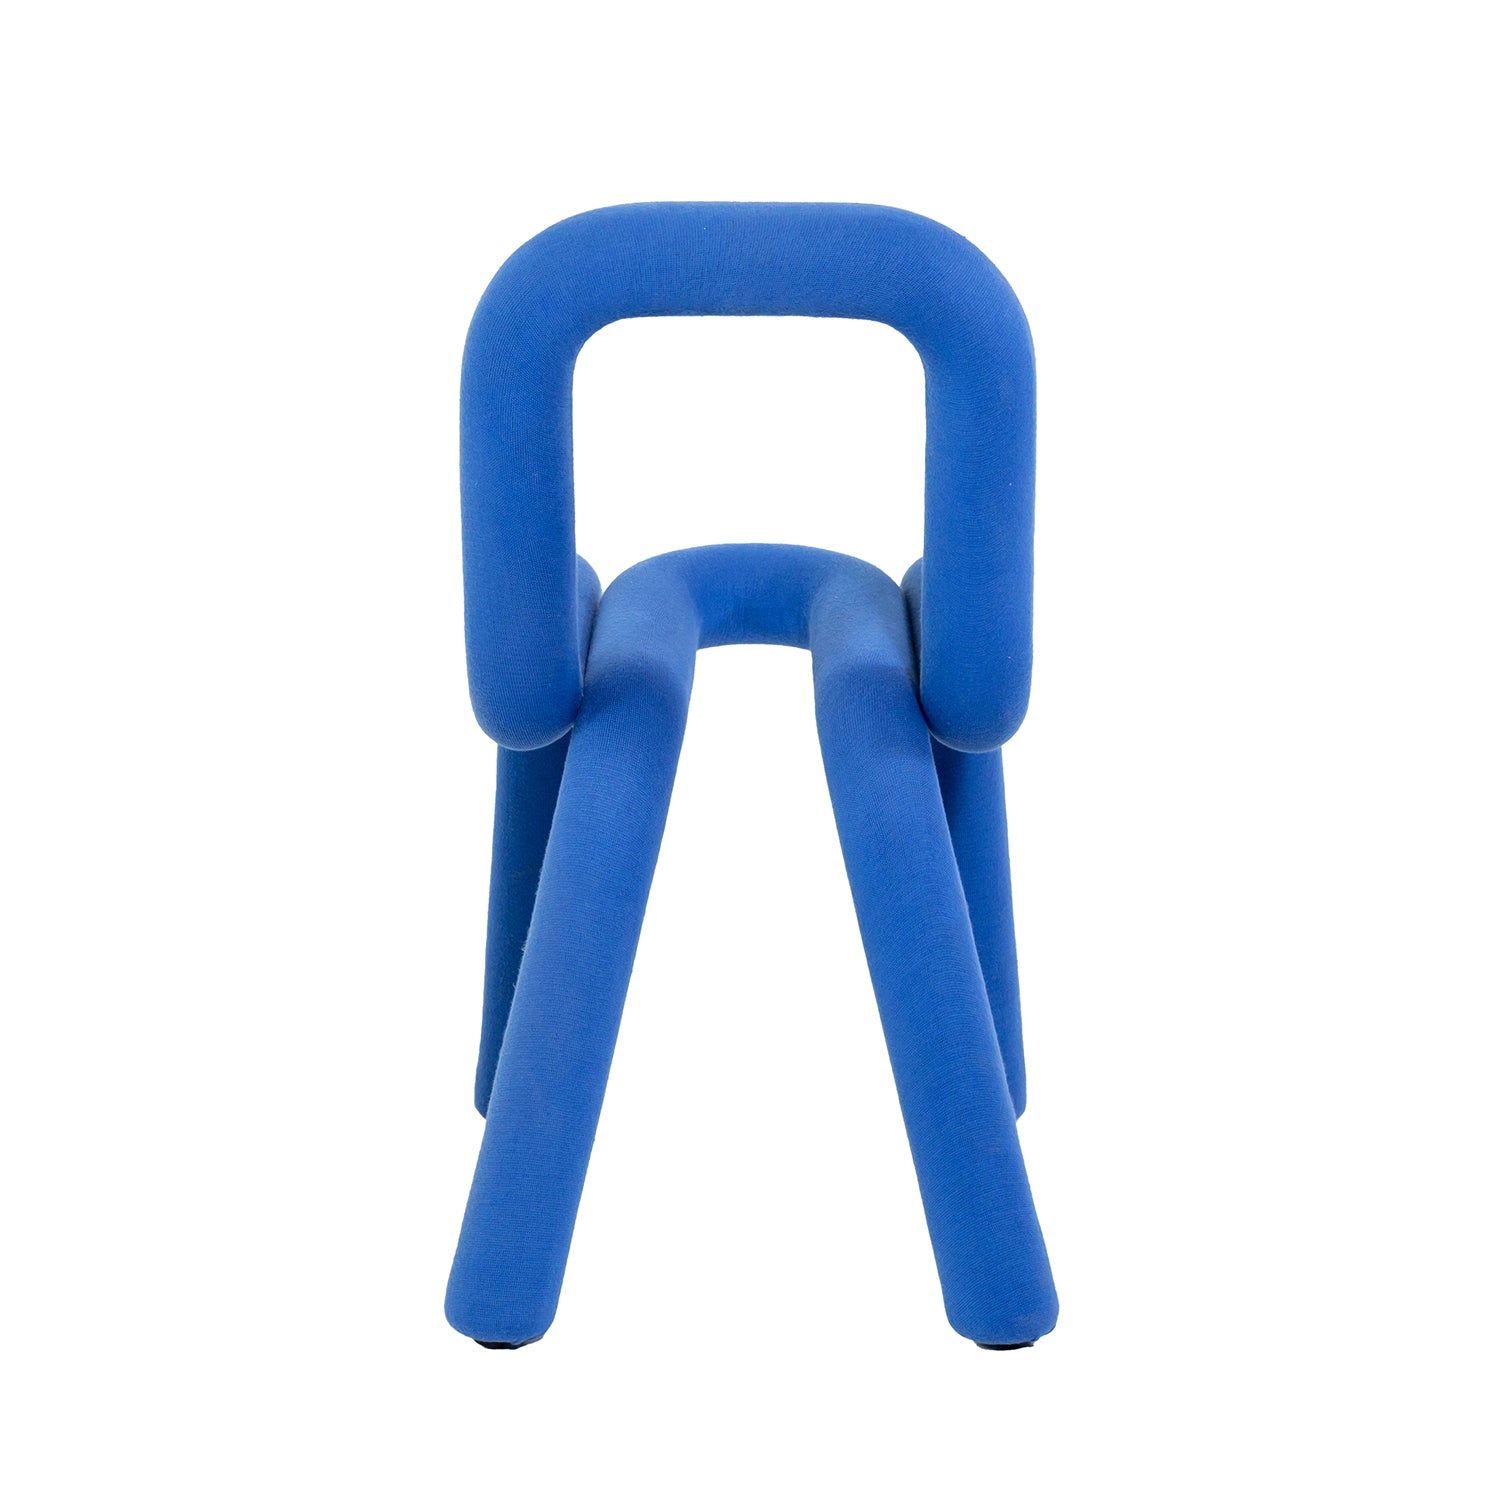 Bold Style Chair Blue